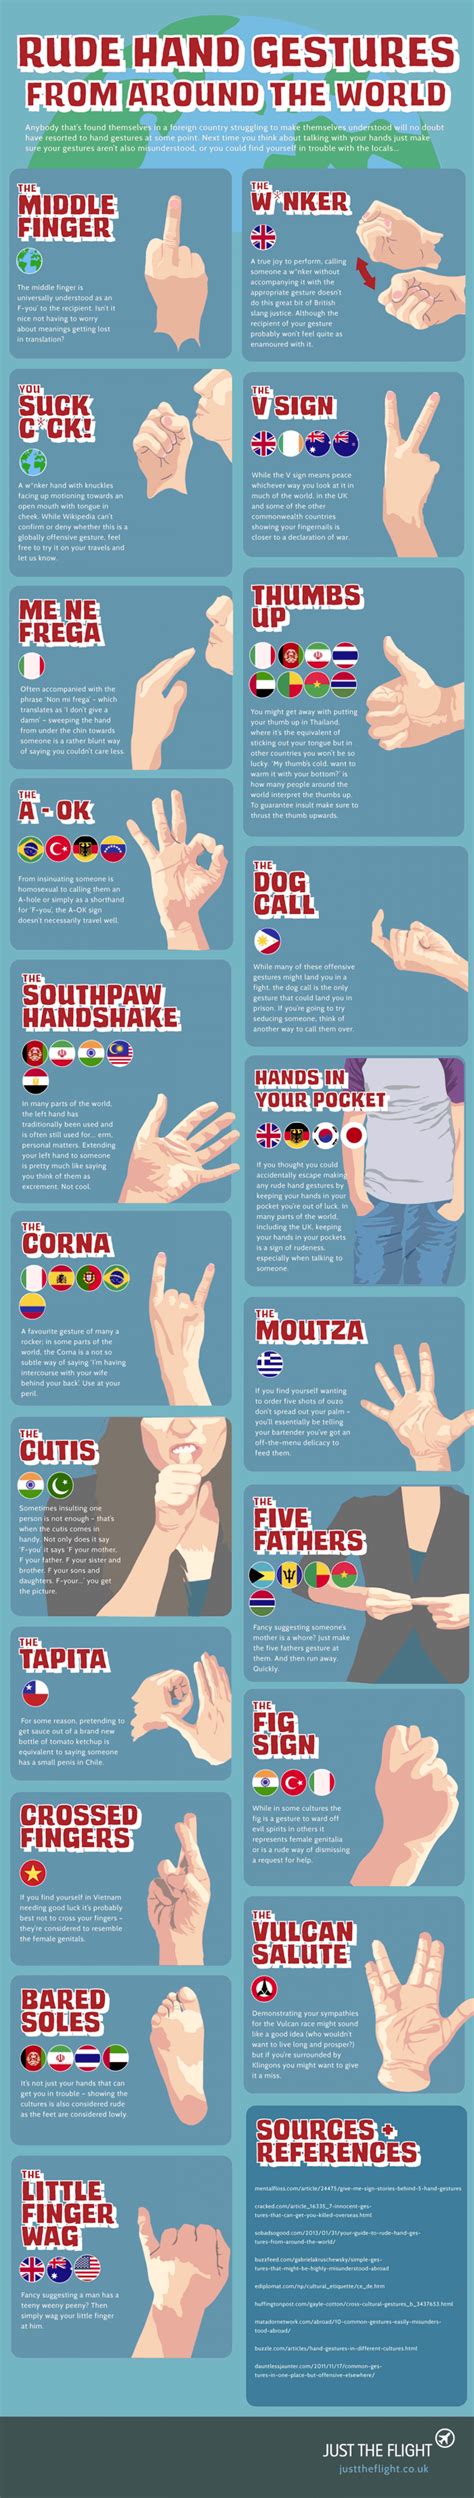 Never Use These Bad Hand Gestures In Foreign Countries Infographic